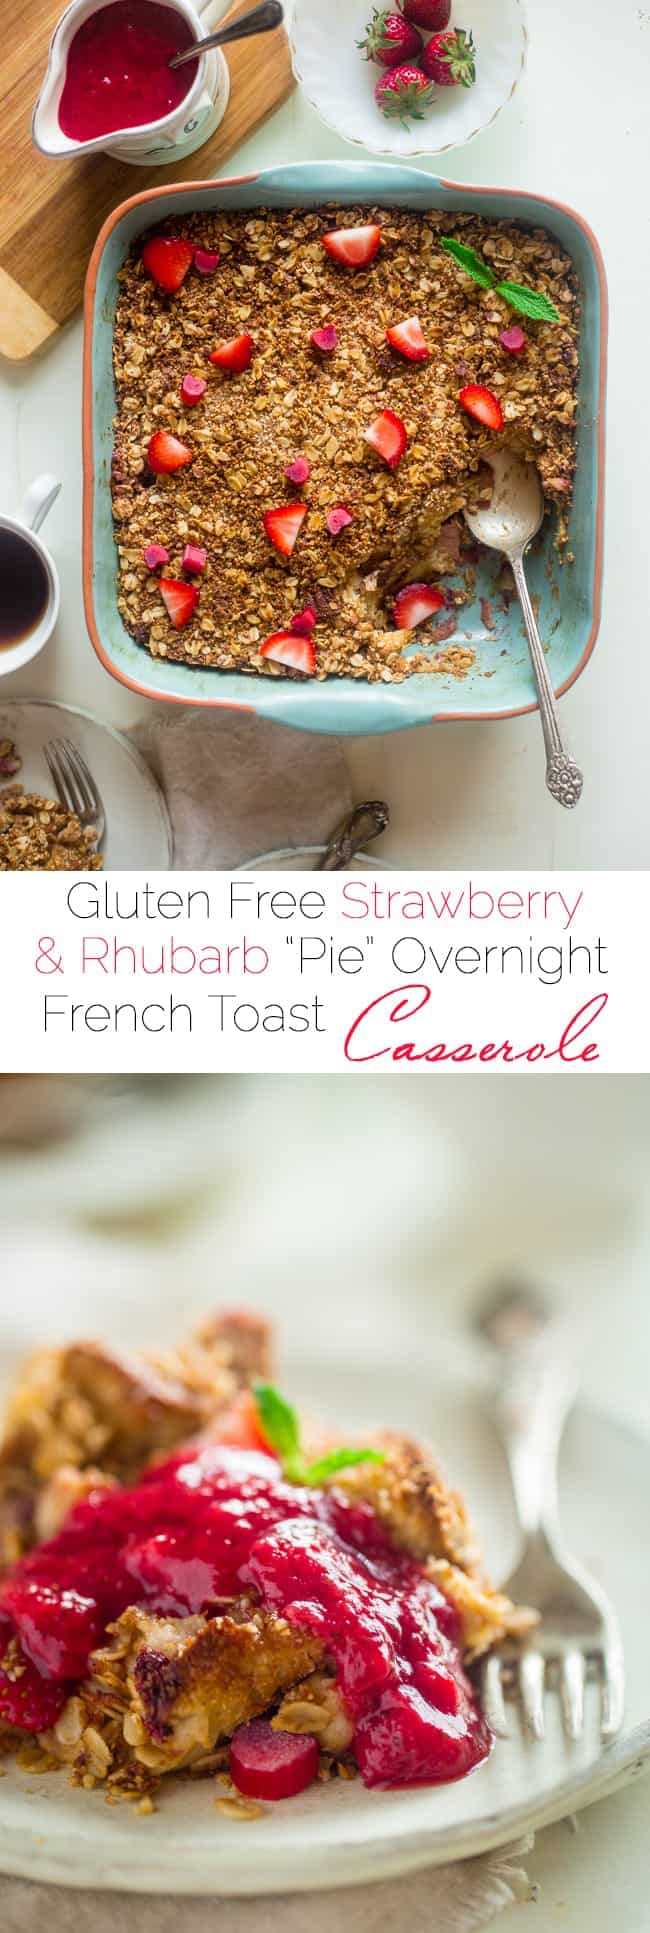 Gluten Free Strawberry Rhubarb French Toast Bake - This easy french toast bake is bursting with sweet strawberries and tangy rhubarb. It's a perfect, make-ahead spring breakfast or brunch! | Foodfaithfitness.com | @FoodFaithFit